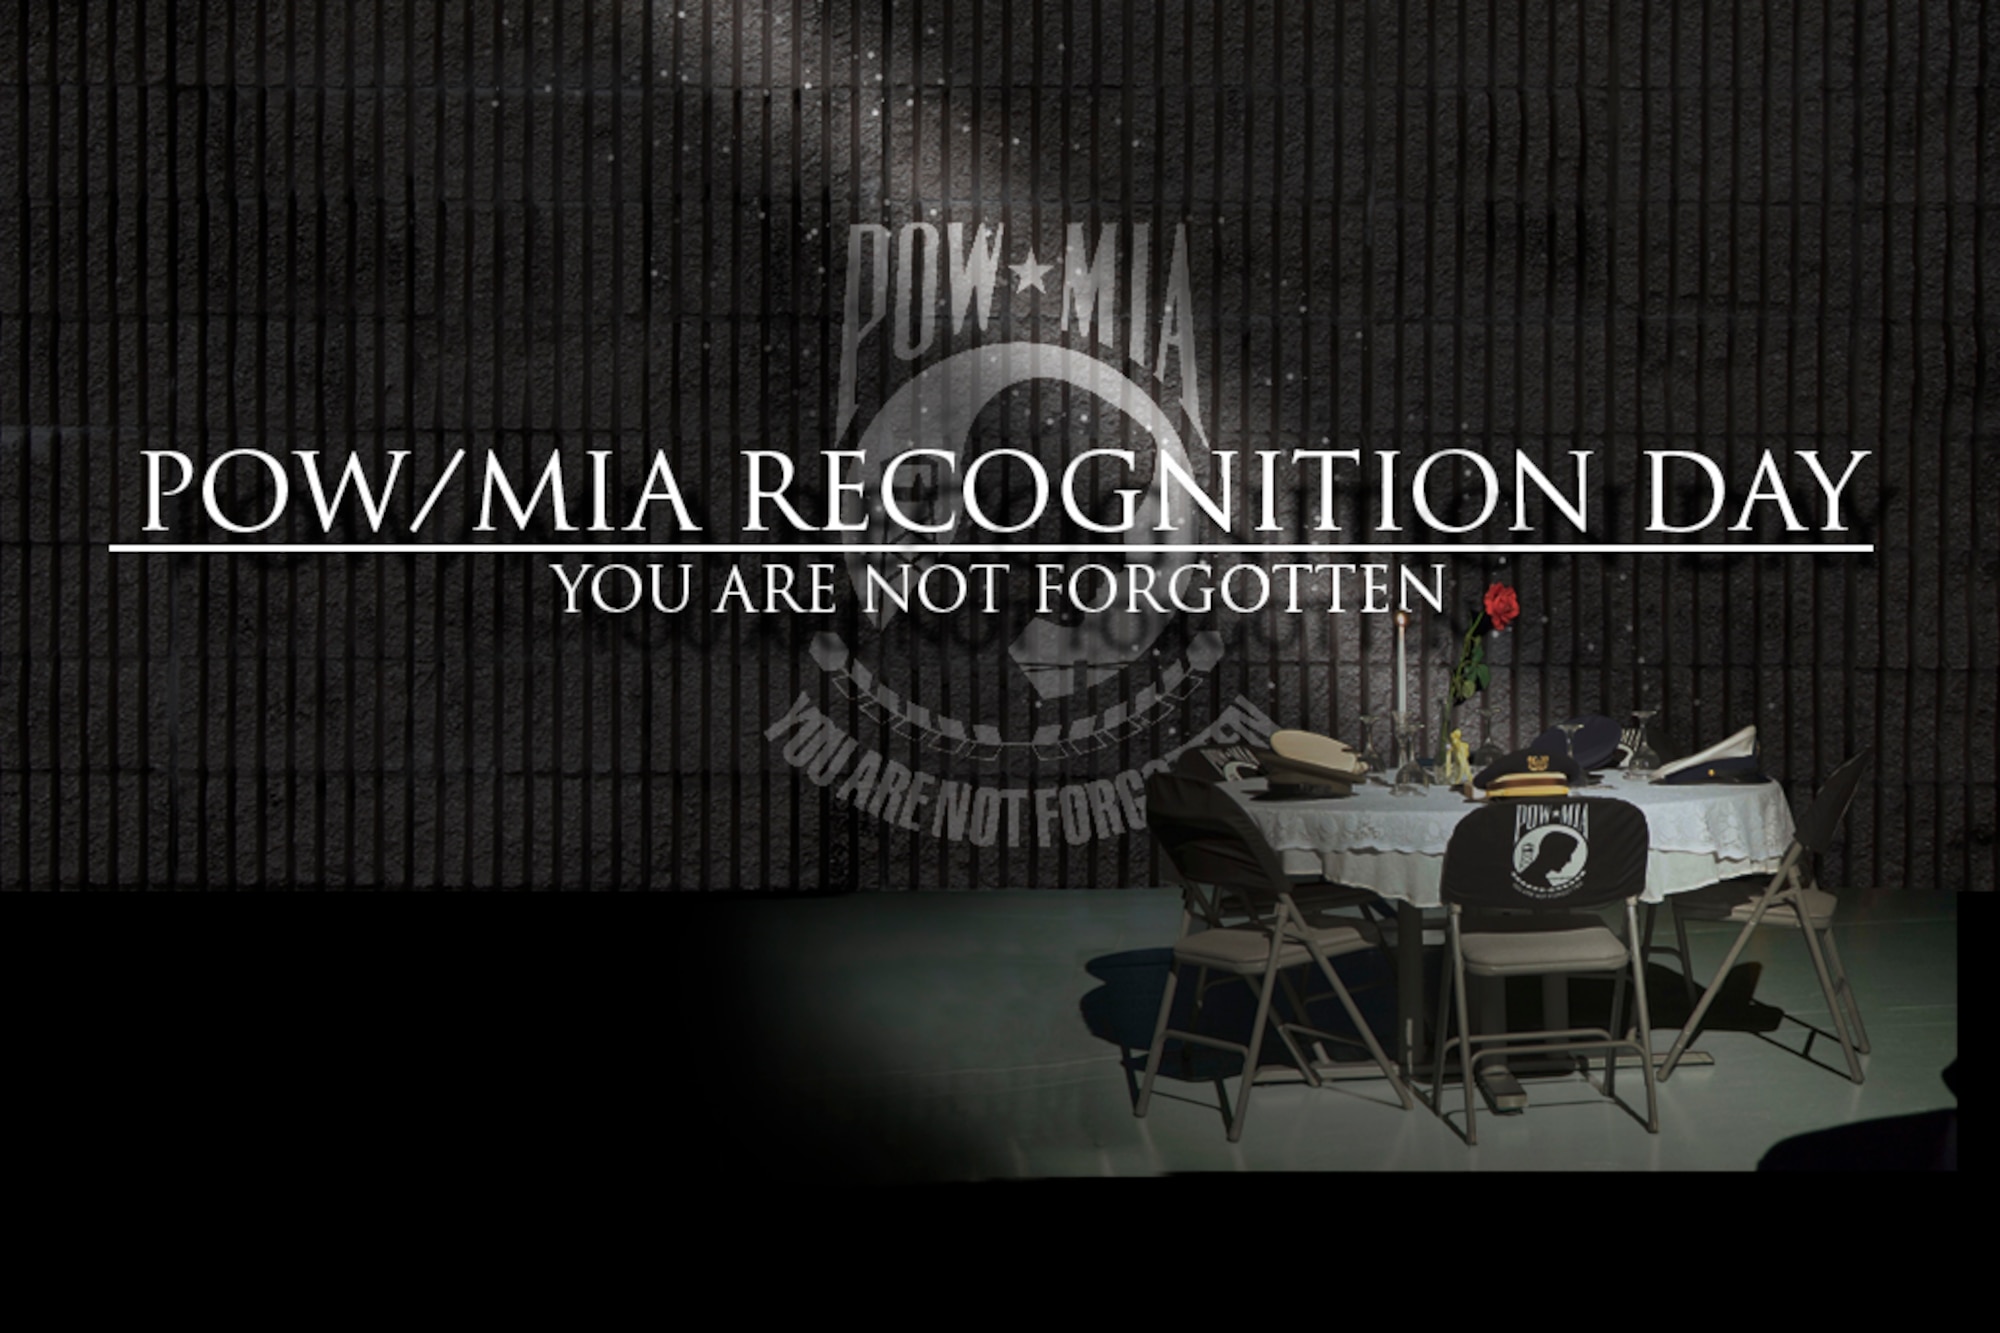 National POW/MIA Recognition Day, observed on the third Friday of September, honors the sacrifices and service of Americans who were prisoners of war or are missing in action, as well as their families. (DoD graphic)